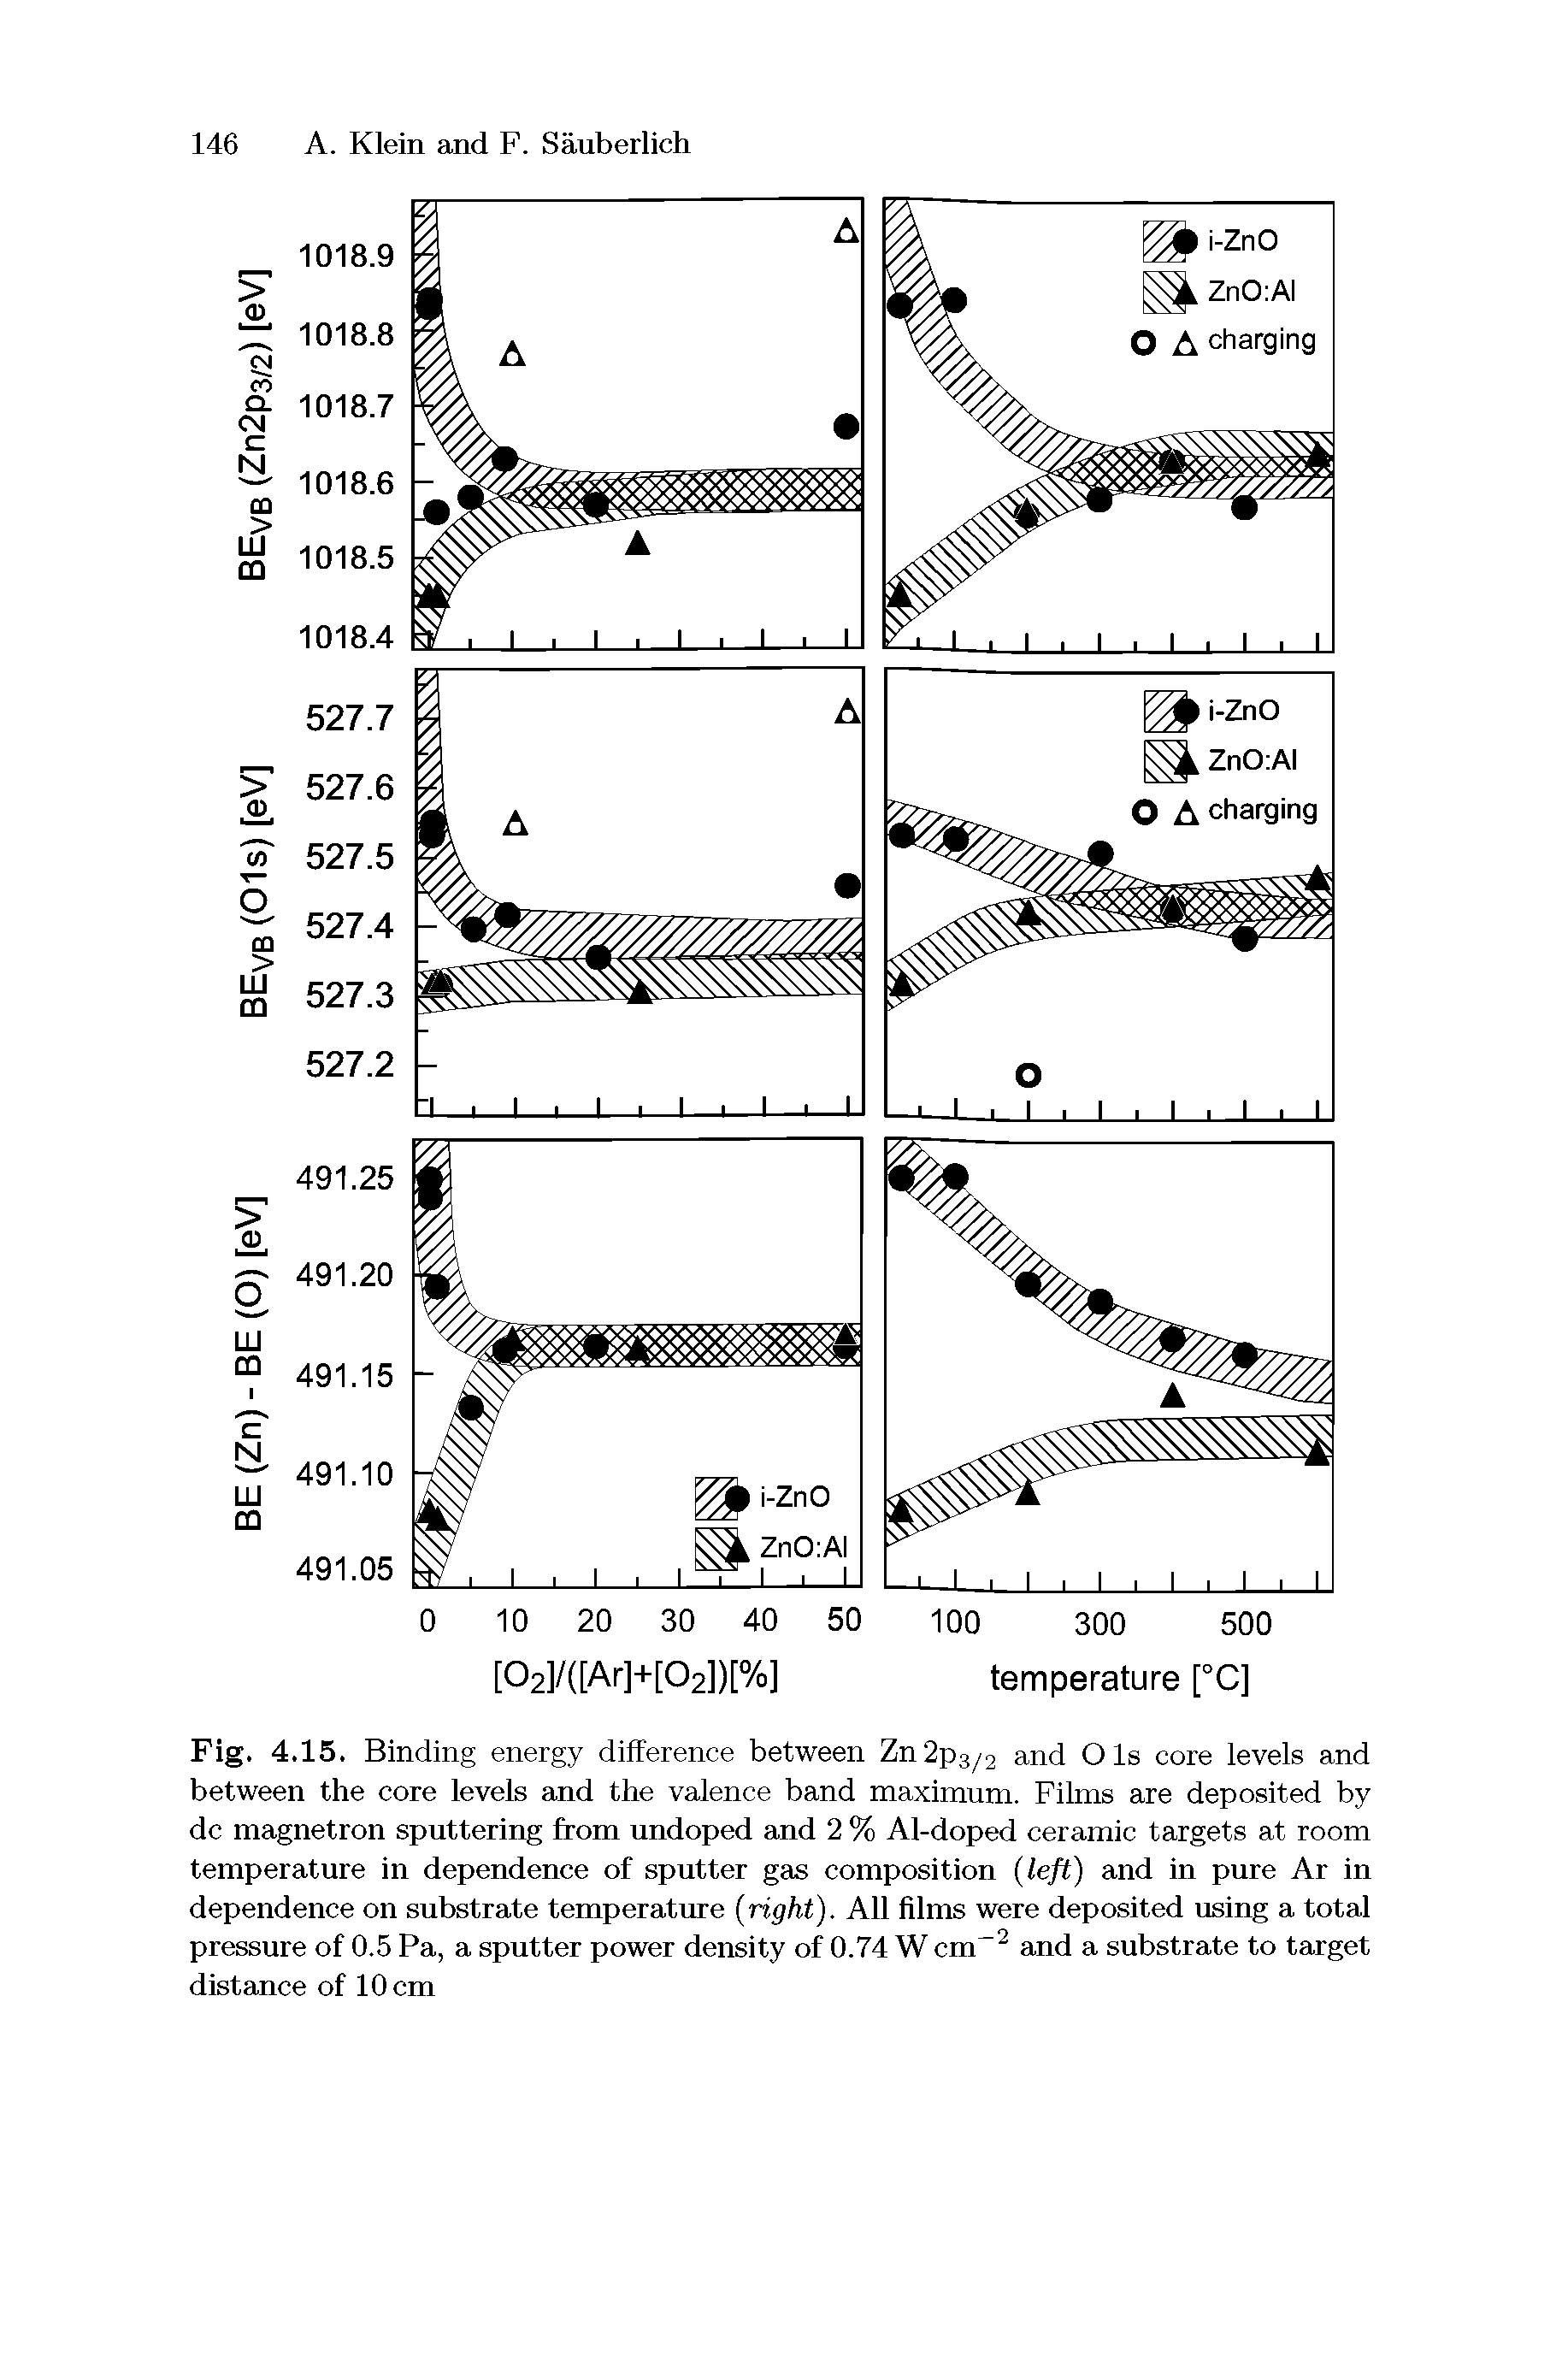 Fig. 4.15. Binding energy difference between Zn2p3/2 and O Is core levels and between the core levels and the valence band maximum. Films are deposited by dc magnetron sputtering from undoped and 2 % Al-doped ceramic targets at room temperature in dependence of sputter gas composition (left) and in pure Ar in dependence on substrate temperature (right). All films were deposited using a total pressure of 0.5 Pa, a sputter power density of 0.74 W cm-2 and a substrate to target distance of 10 cm...